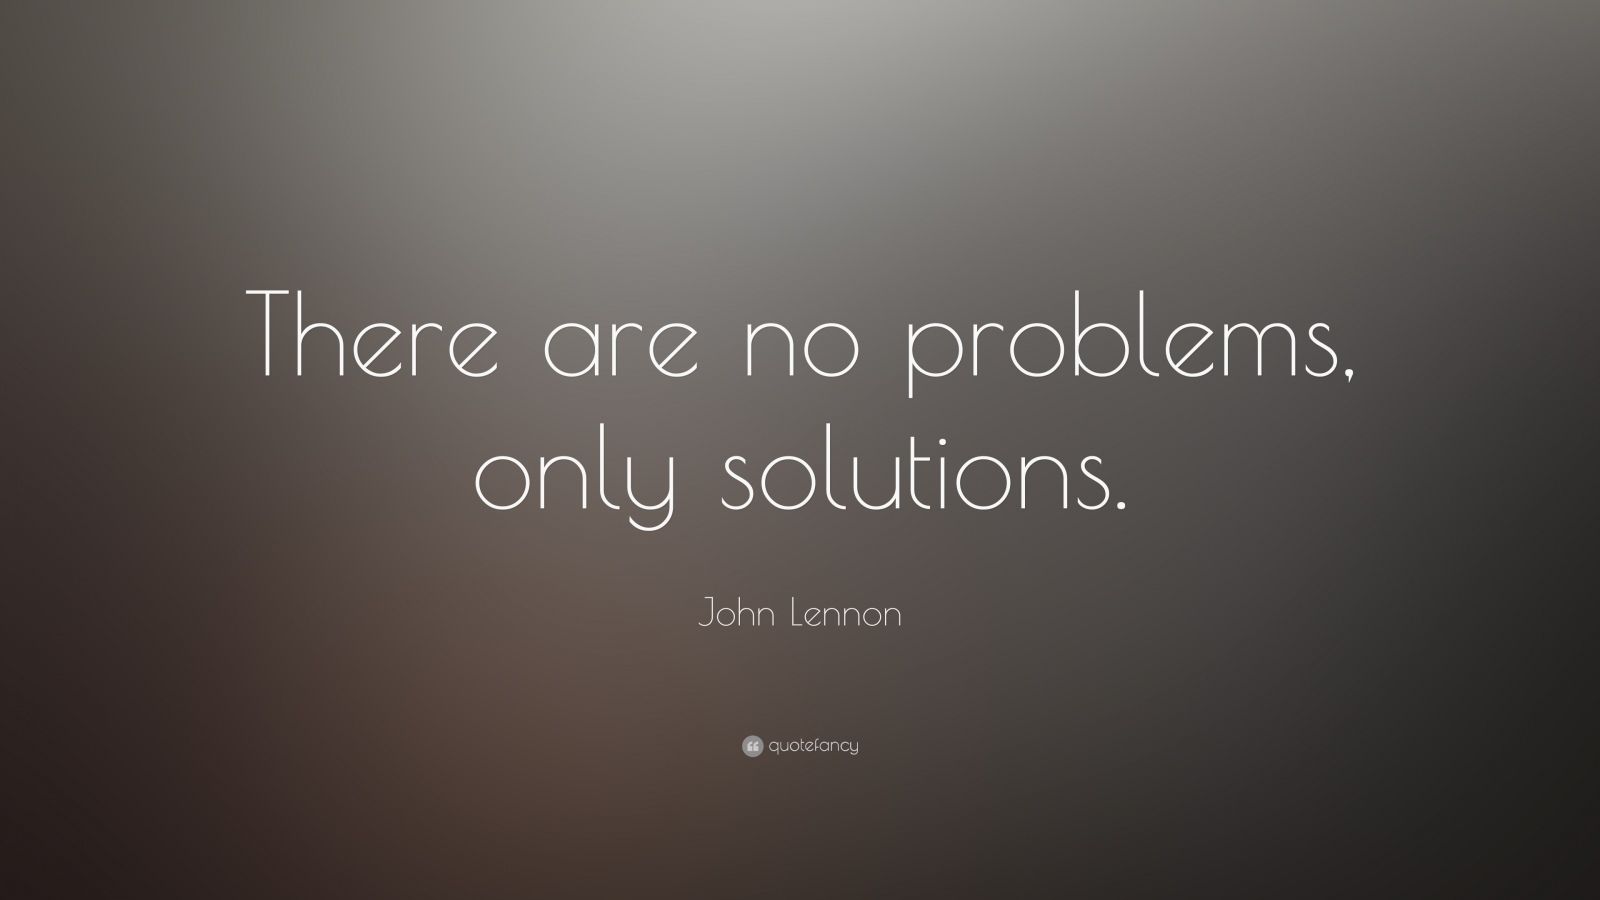 John Lennon Quote: “There are no problems, only solutions.” (20